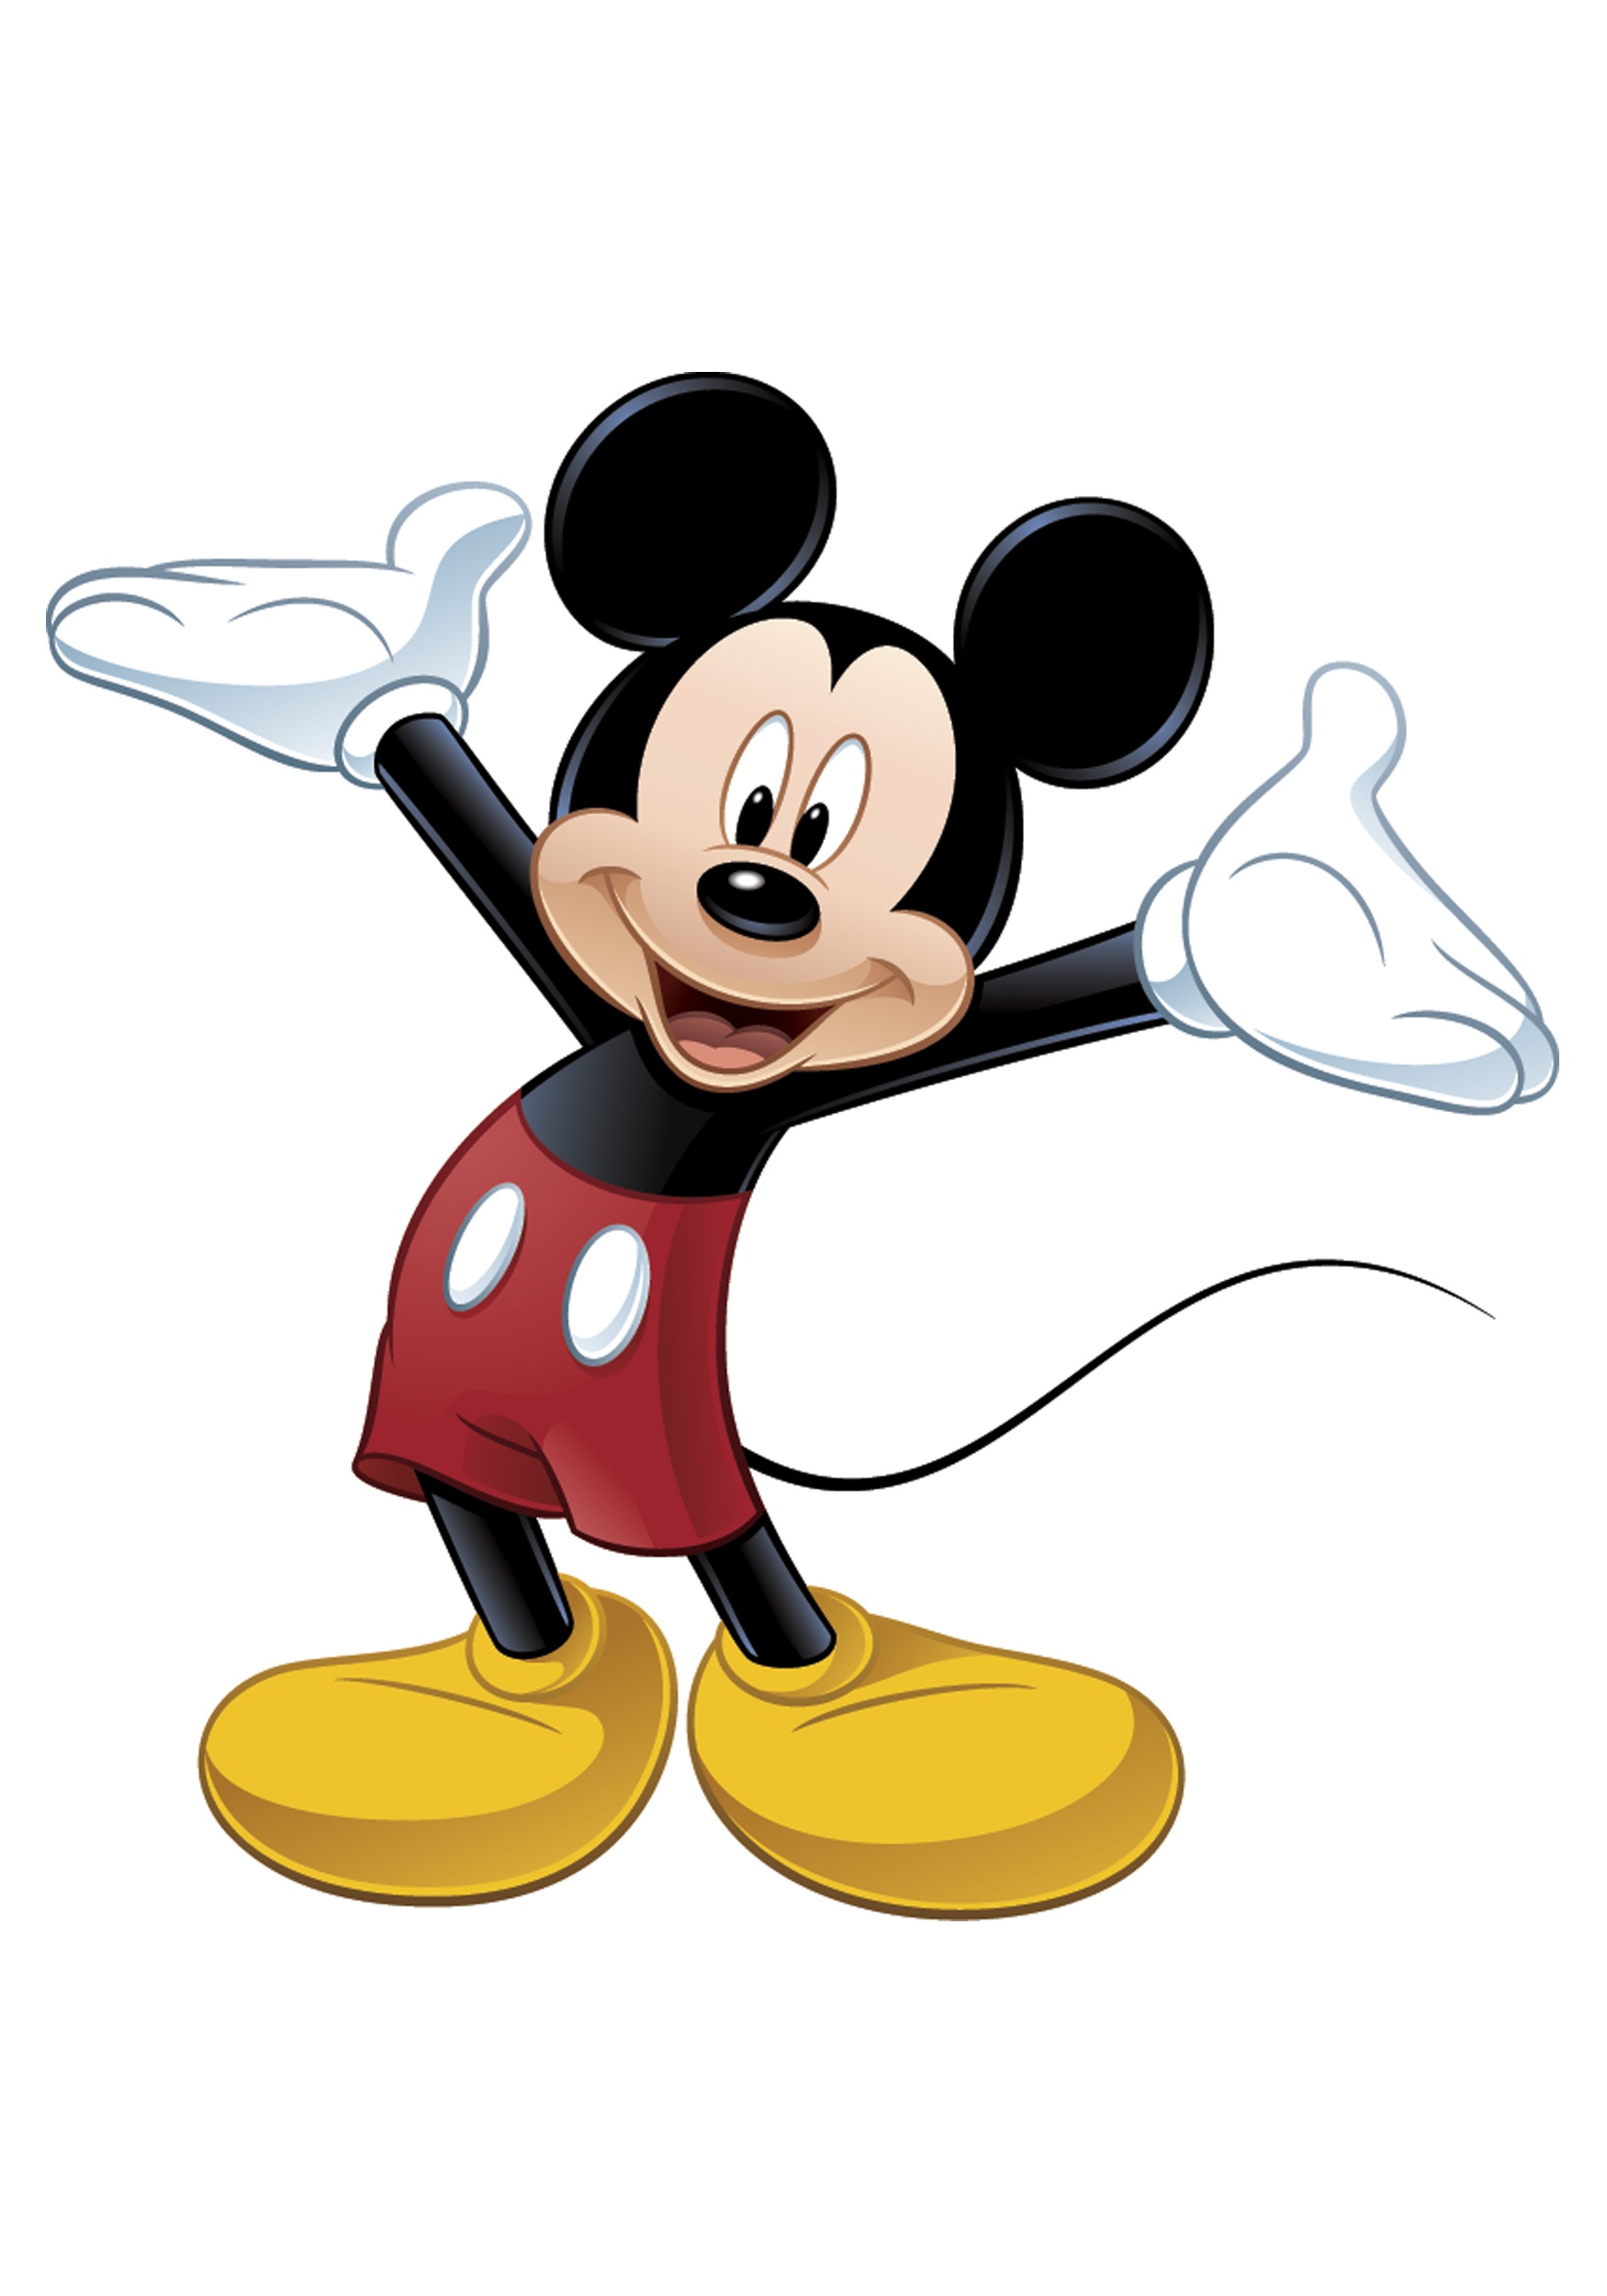 Mickey Mouse Wallpapers High Quality Download Free HD Wallpapers Download Free Images Wallpaper [wallpaper981.blogspot.com]